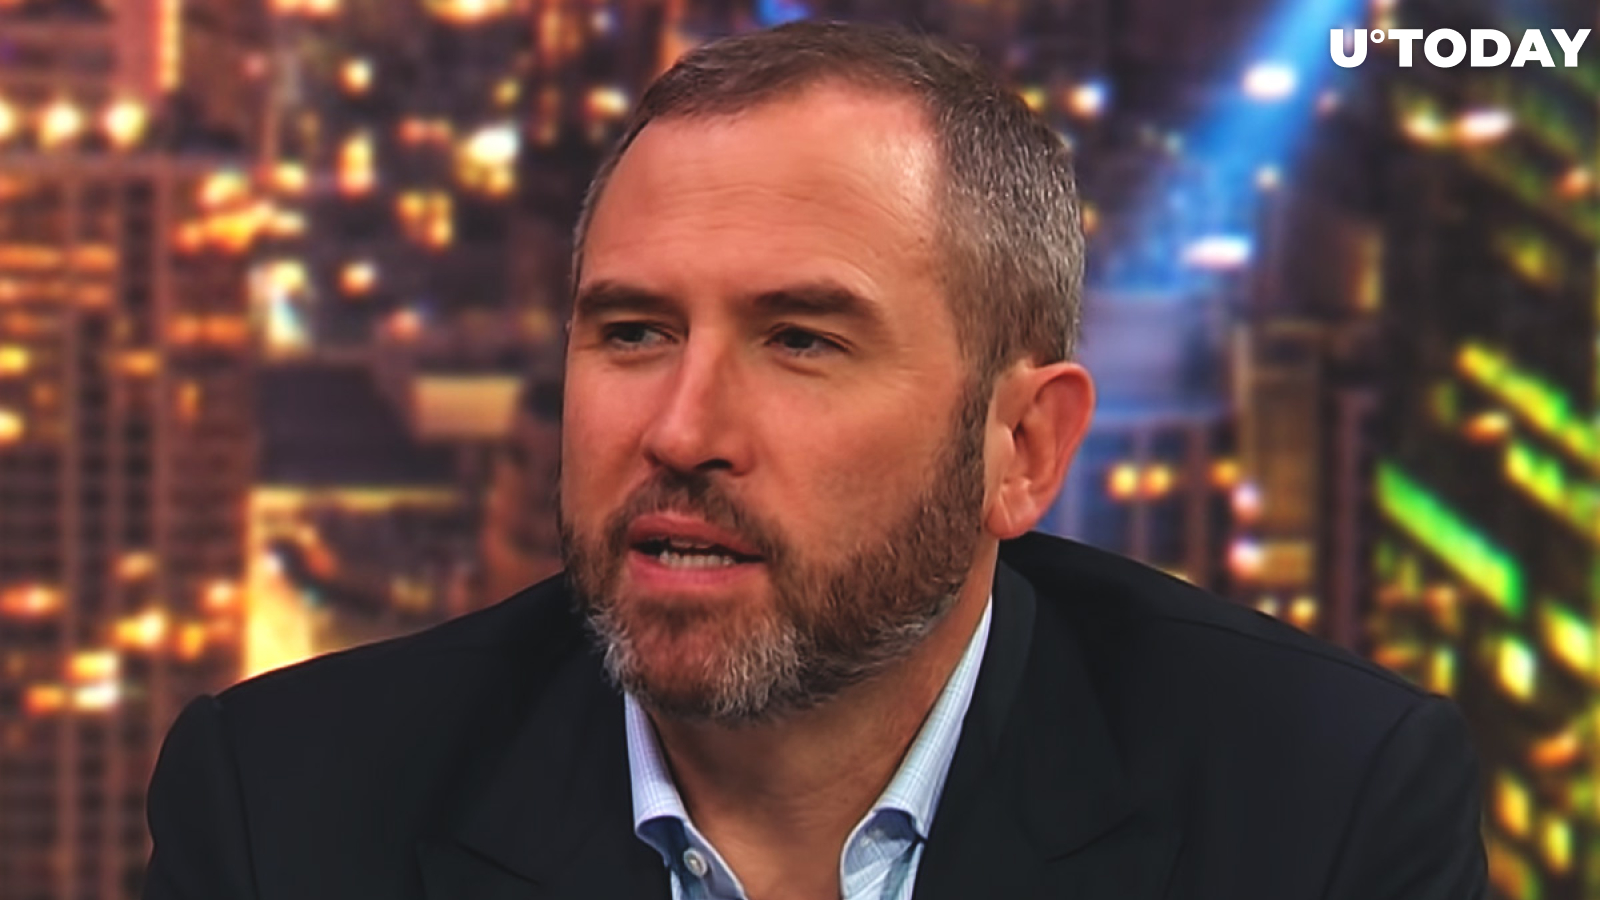 A Ripple of Love: Brad Garlinghouse Expresses Pride for His Children in Endearing Tweet